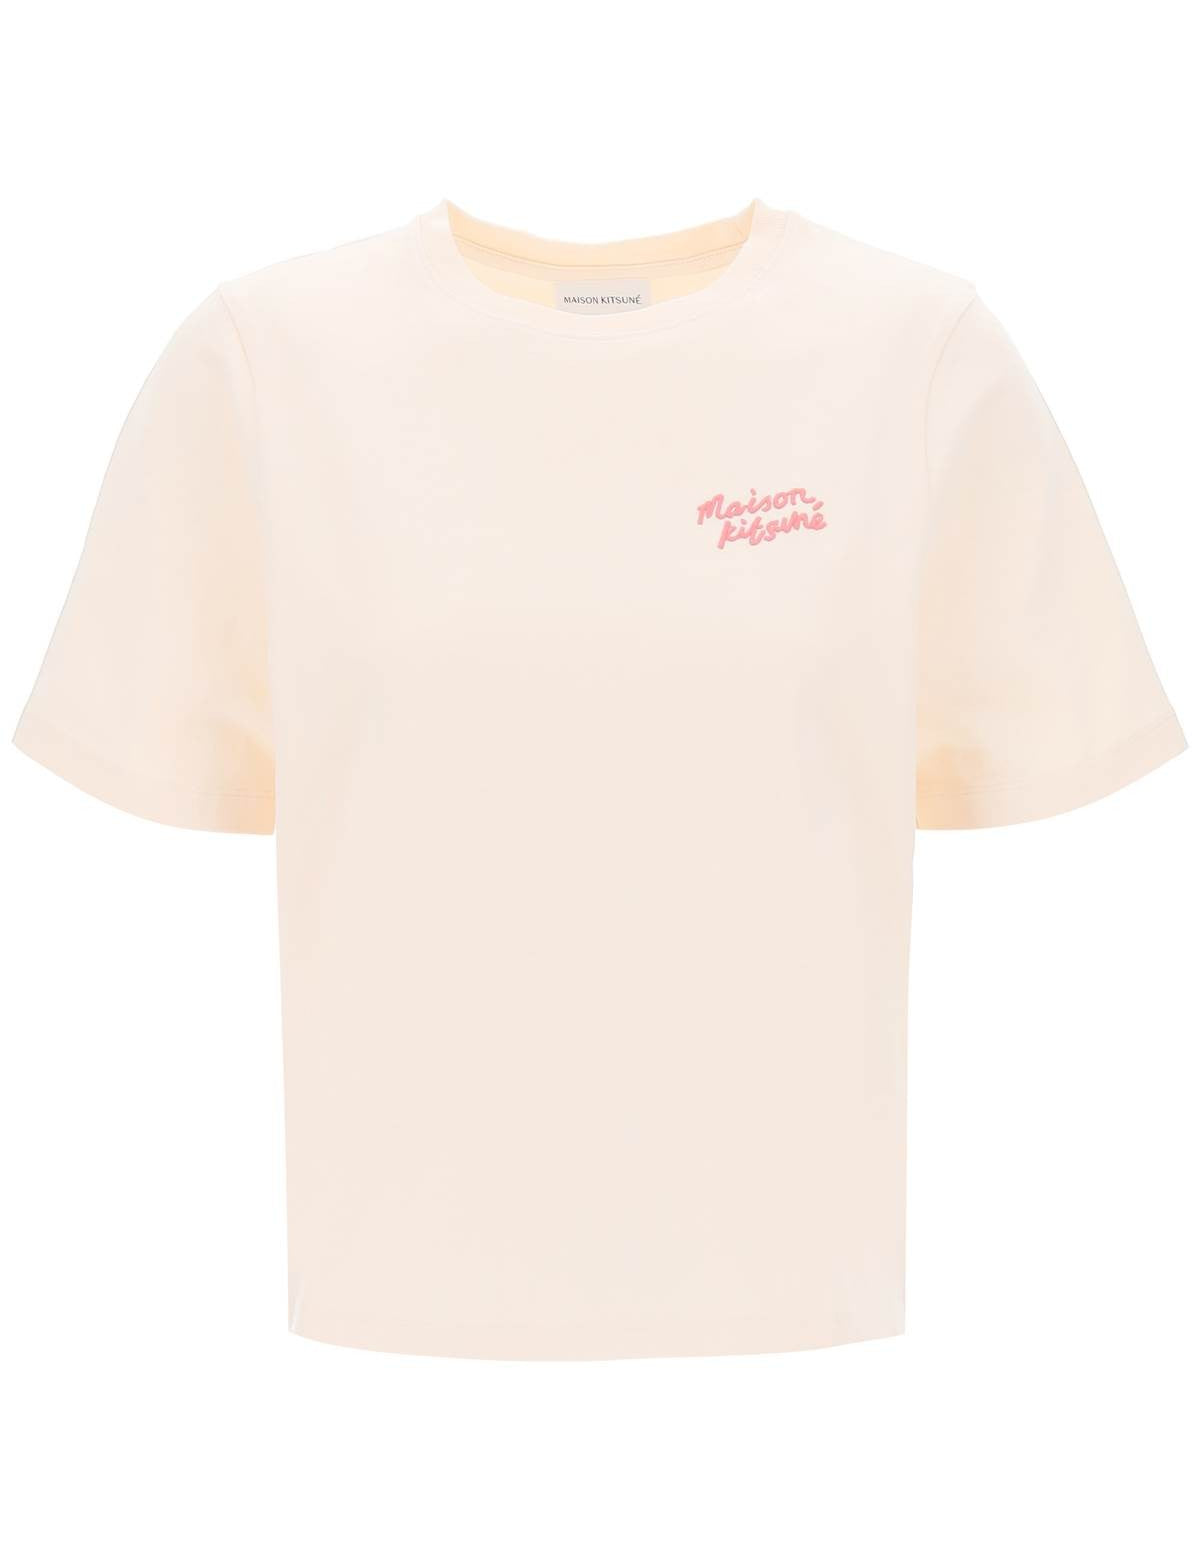 maison-kitsune-round-neck-t-shirt-with-embroidered.jpg